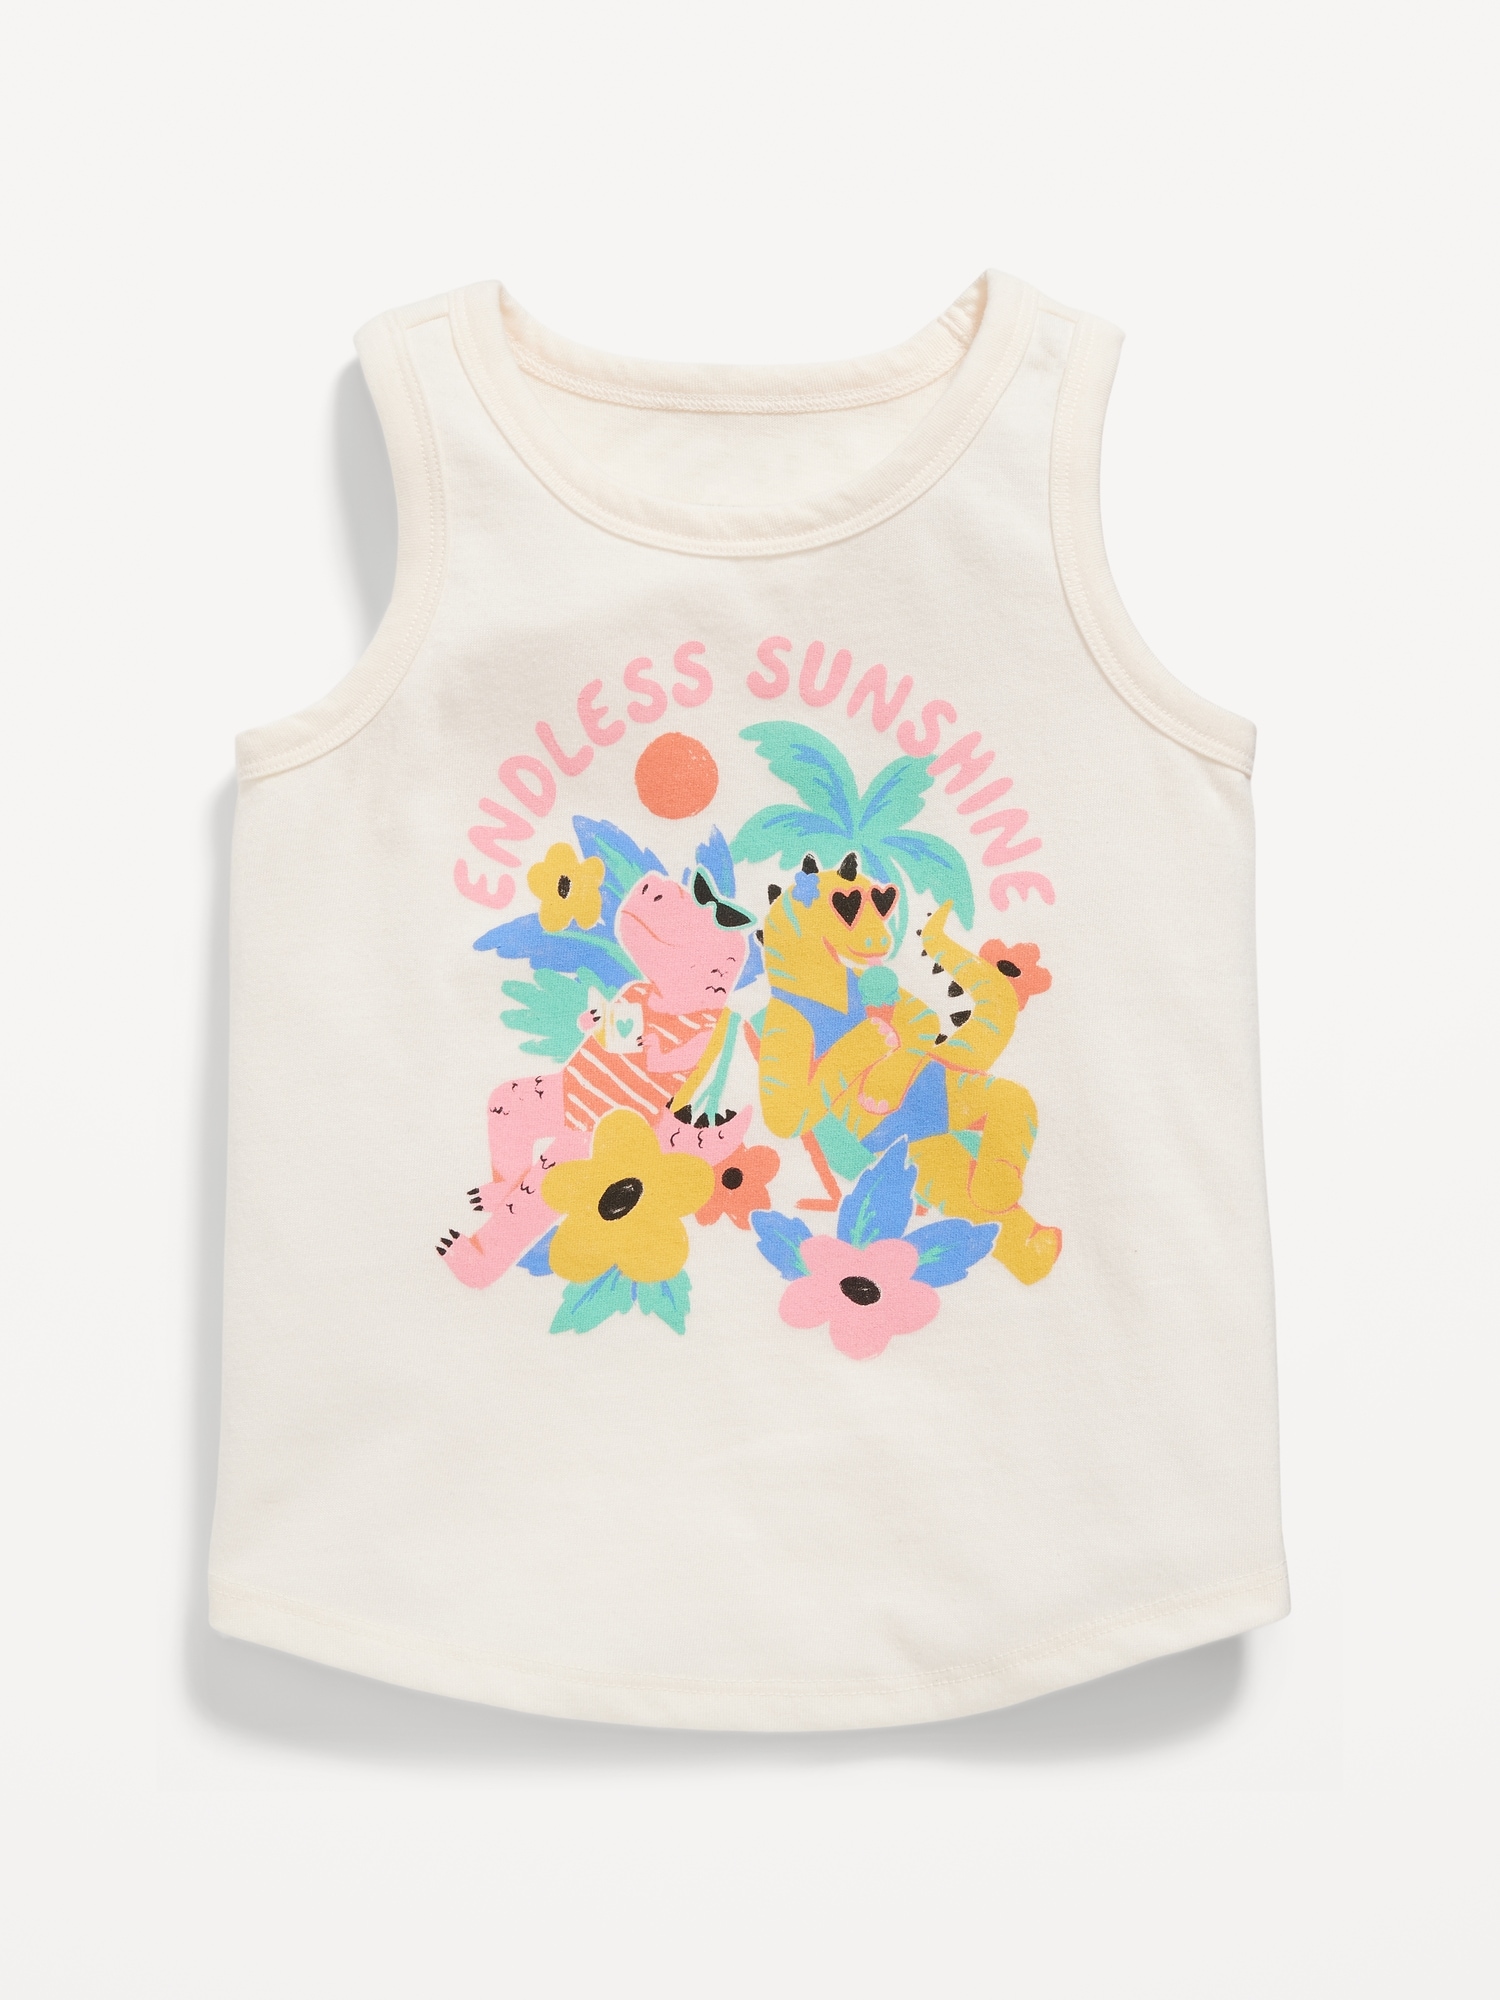 Old Navy Graphic Tank Top for Toddler Girls white. 1